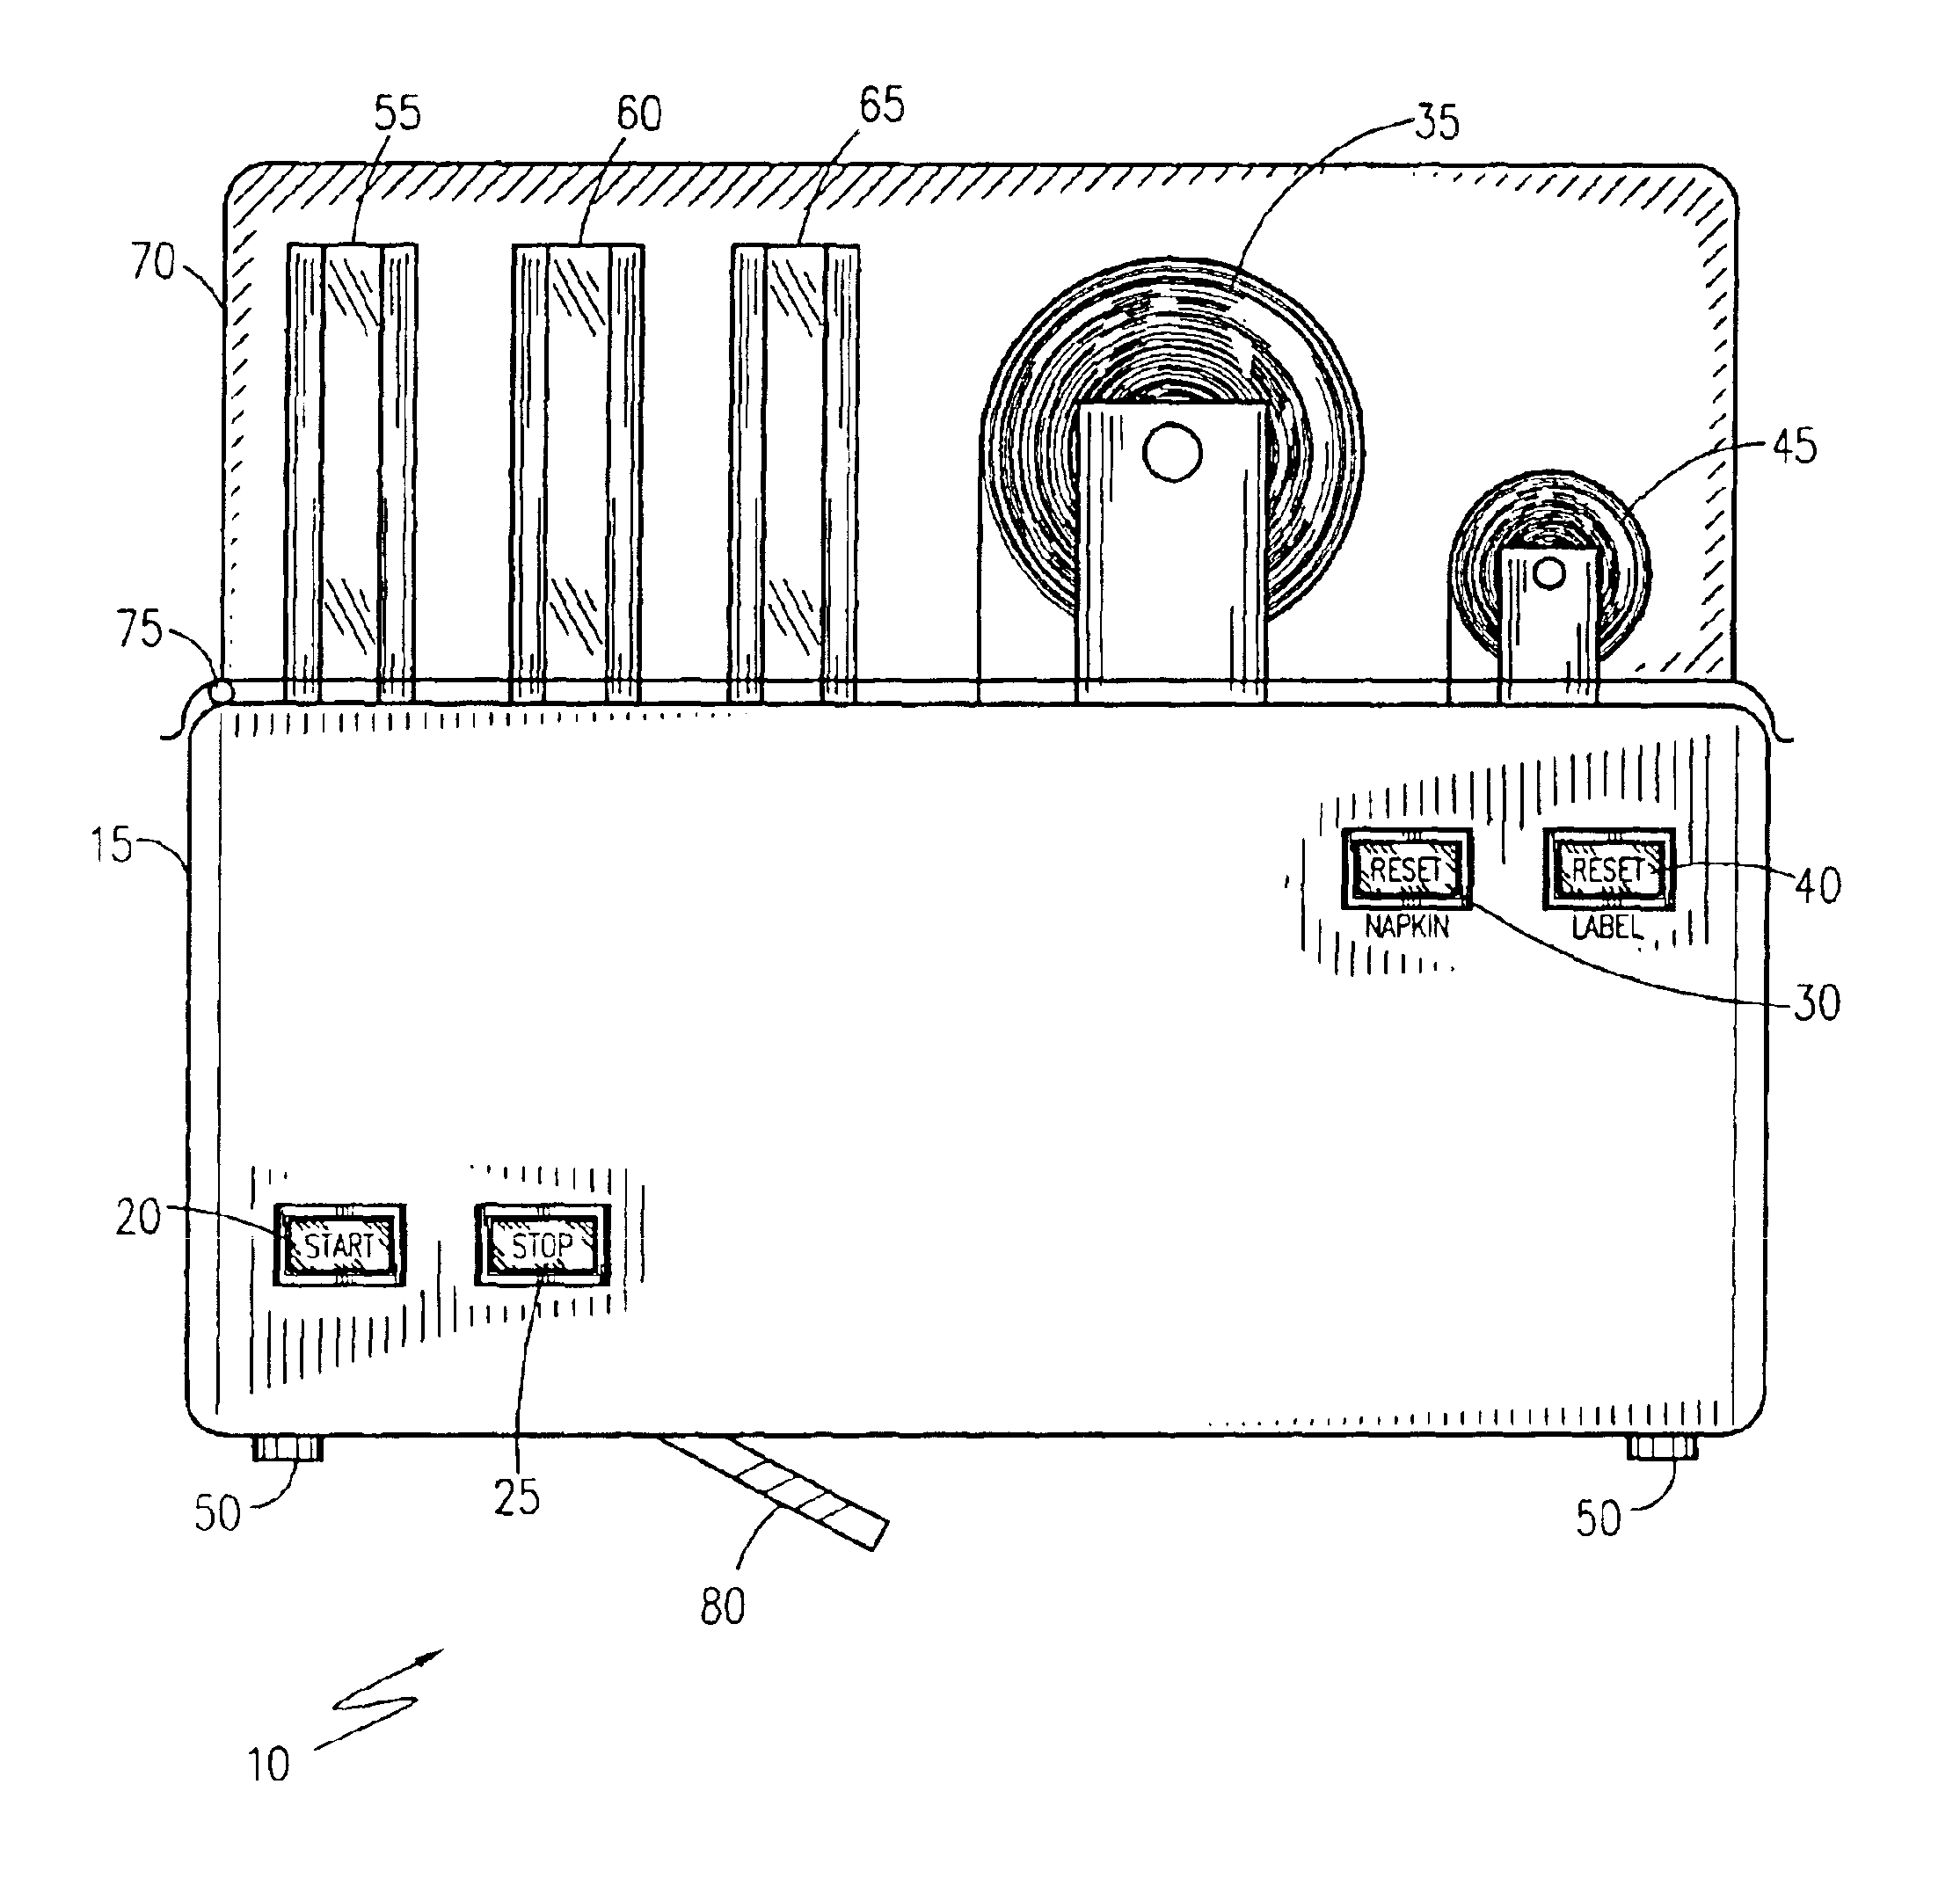 Automated flatware and napkin assembling apparatus